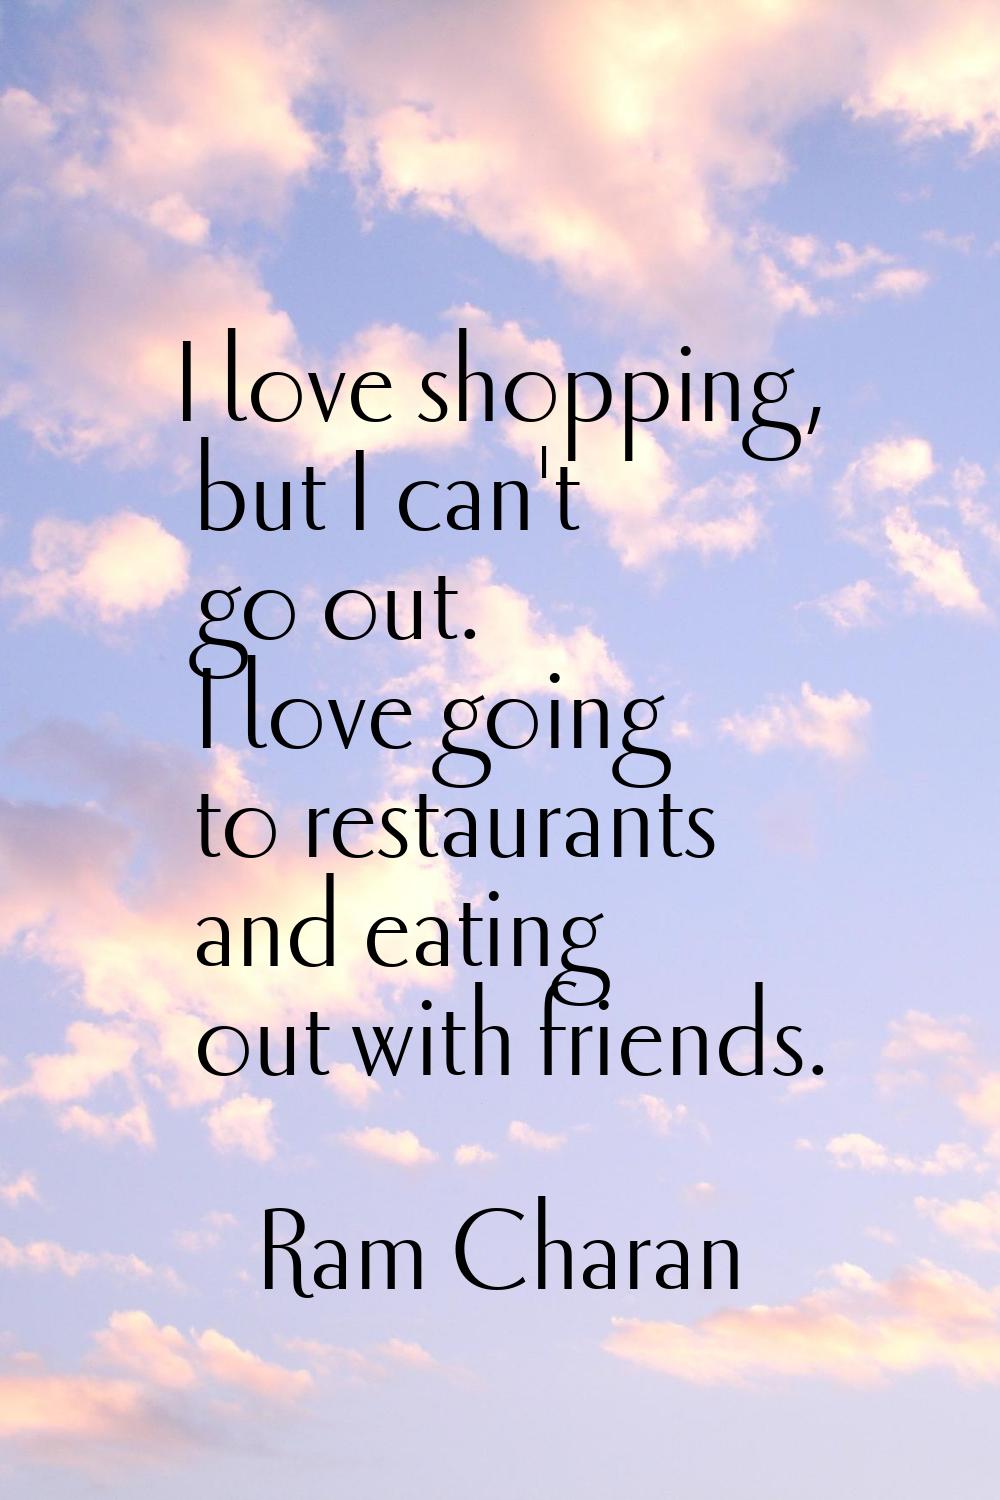 I love shopping, but I can't go out. I love going to restaurants and eating out with friends.